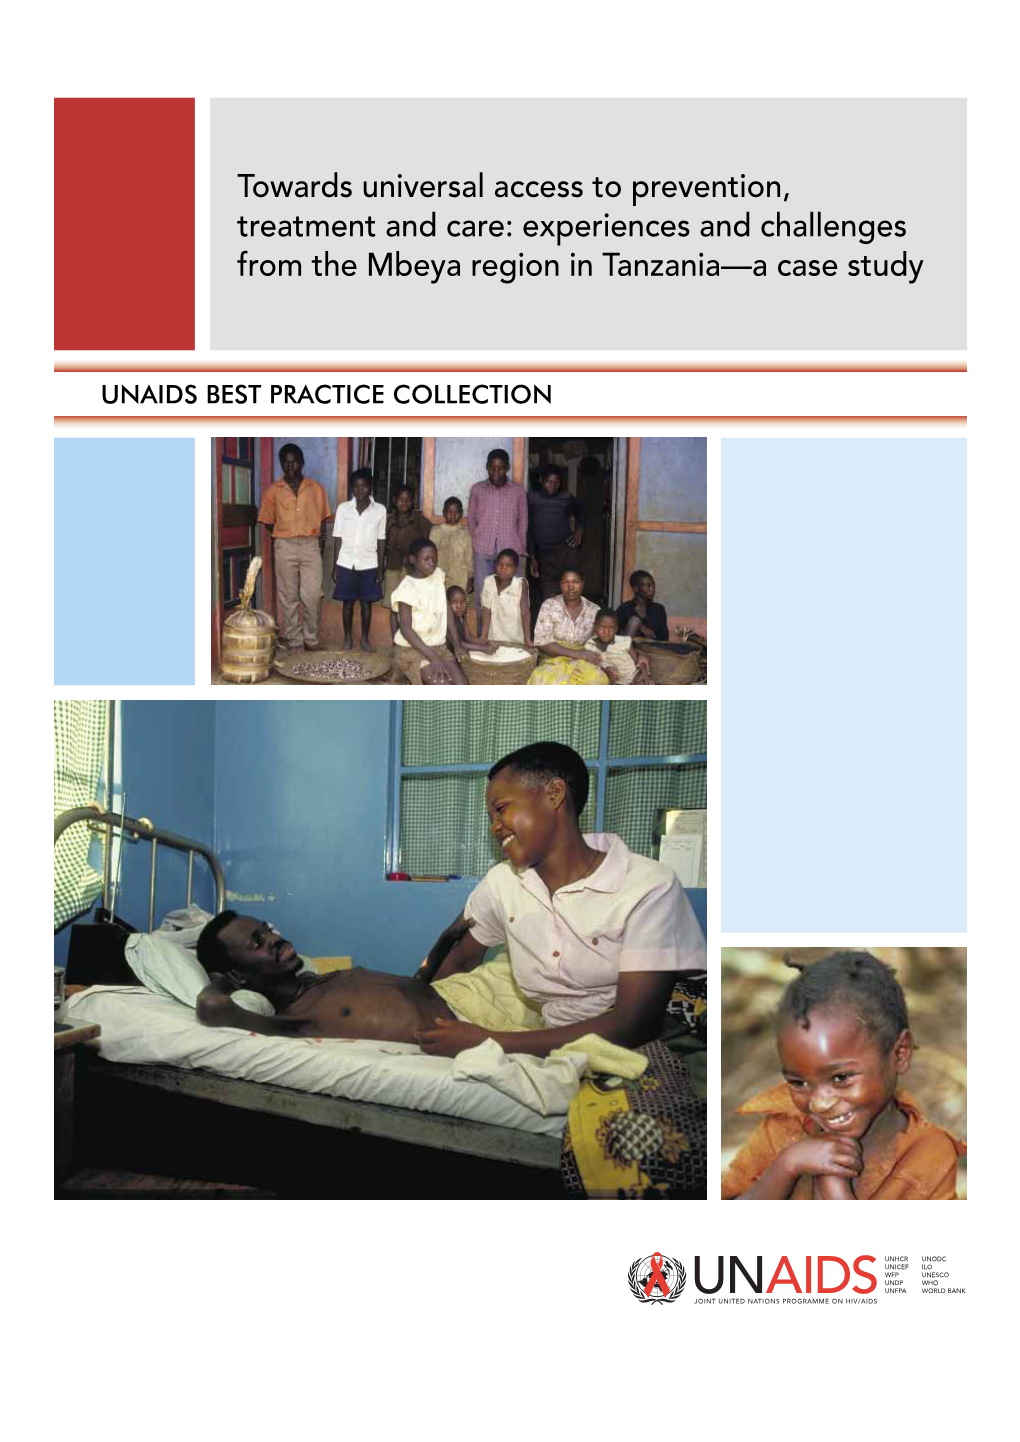 Experiences and Challenges from Mbeya Region in Tanzania